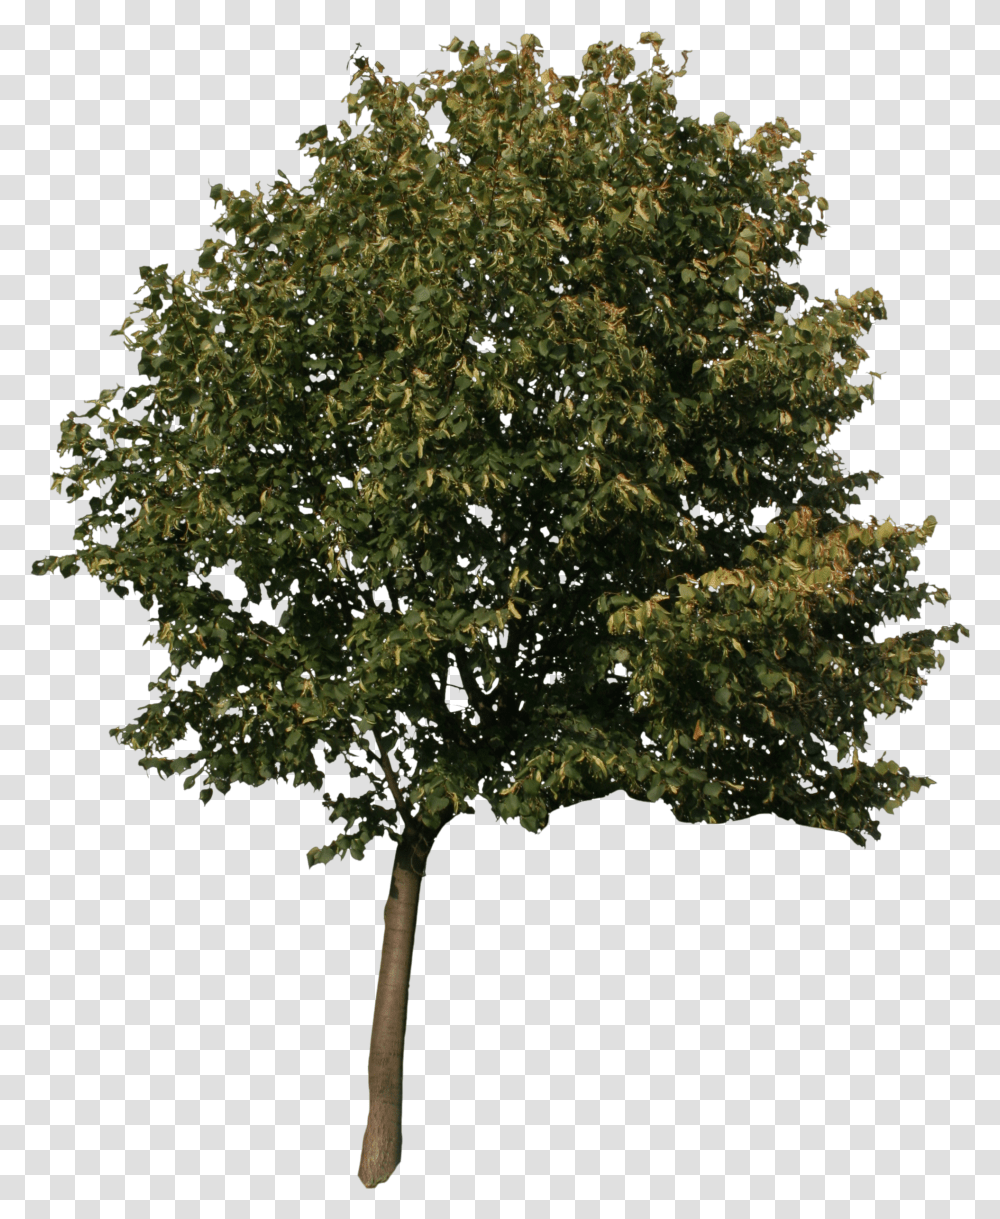 3d Max Tree Model Shrub Small Tree For Photoshop Transparent Png